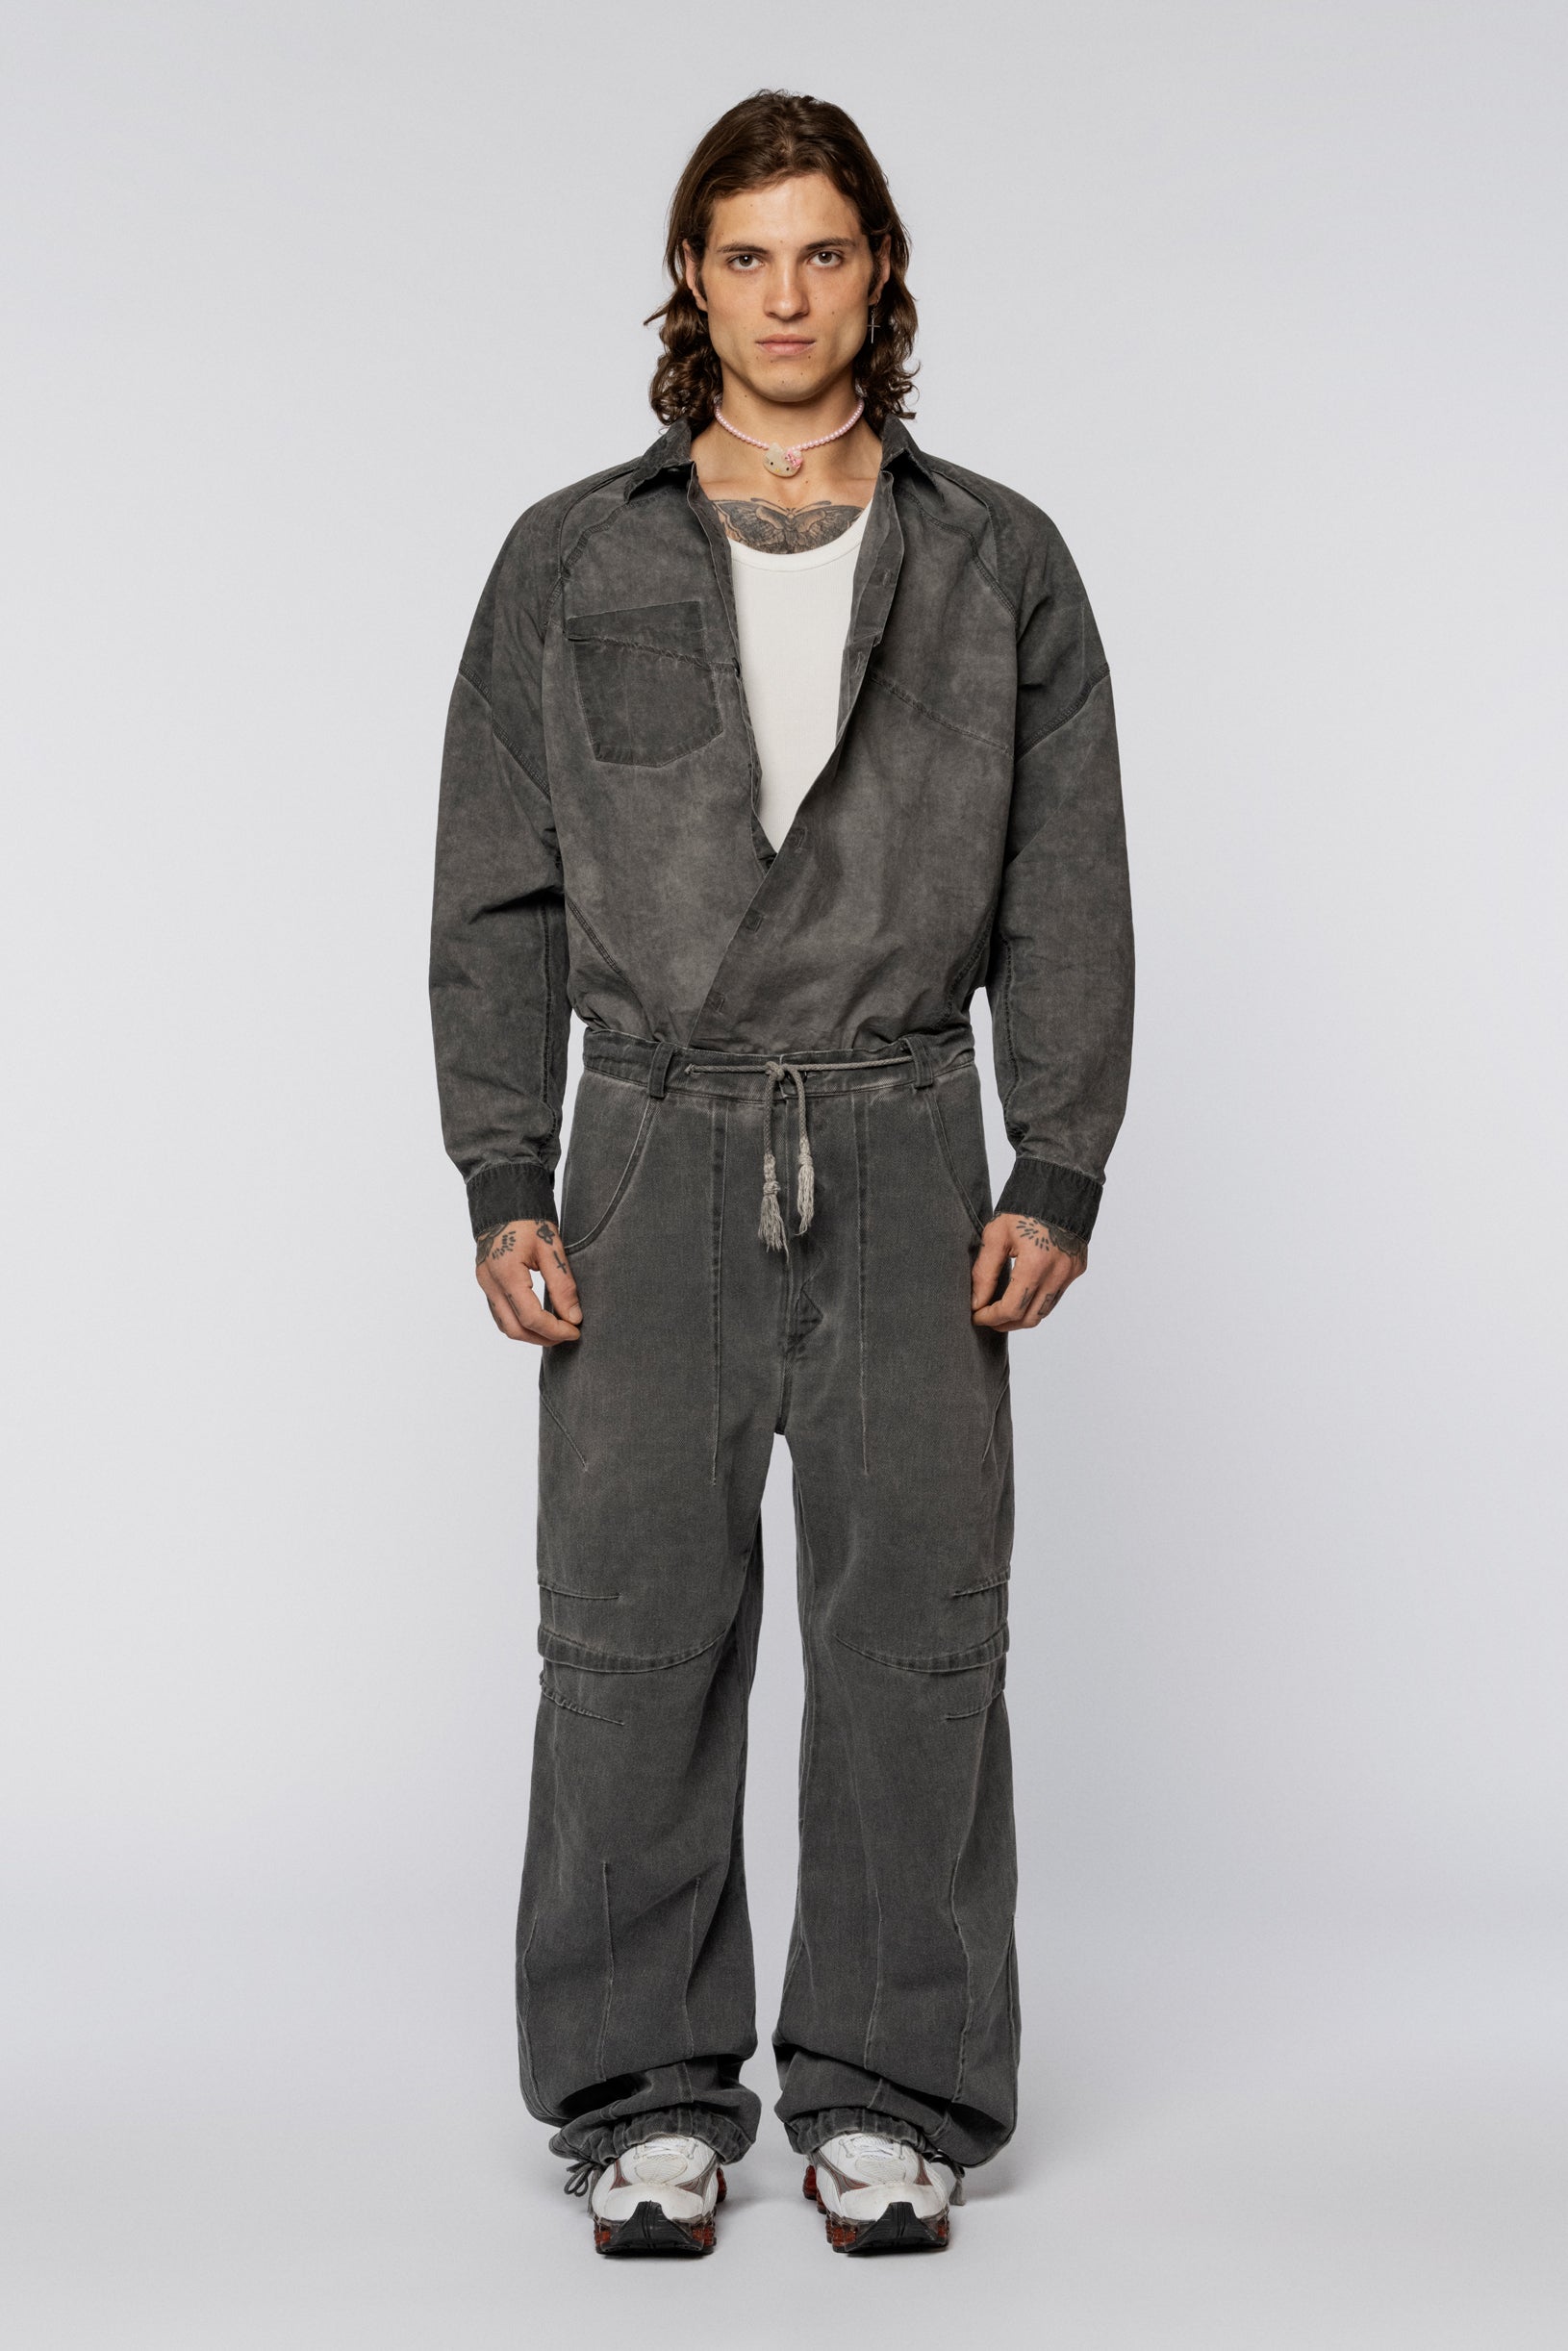 Denim Trousers Folds Grey Old Dyed